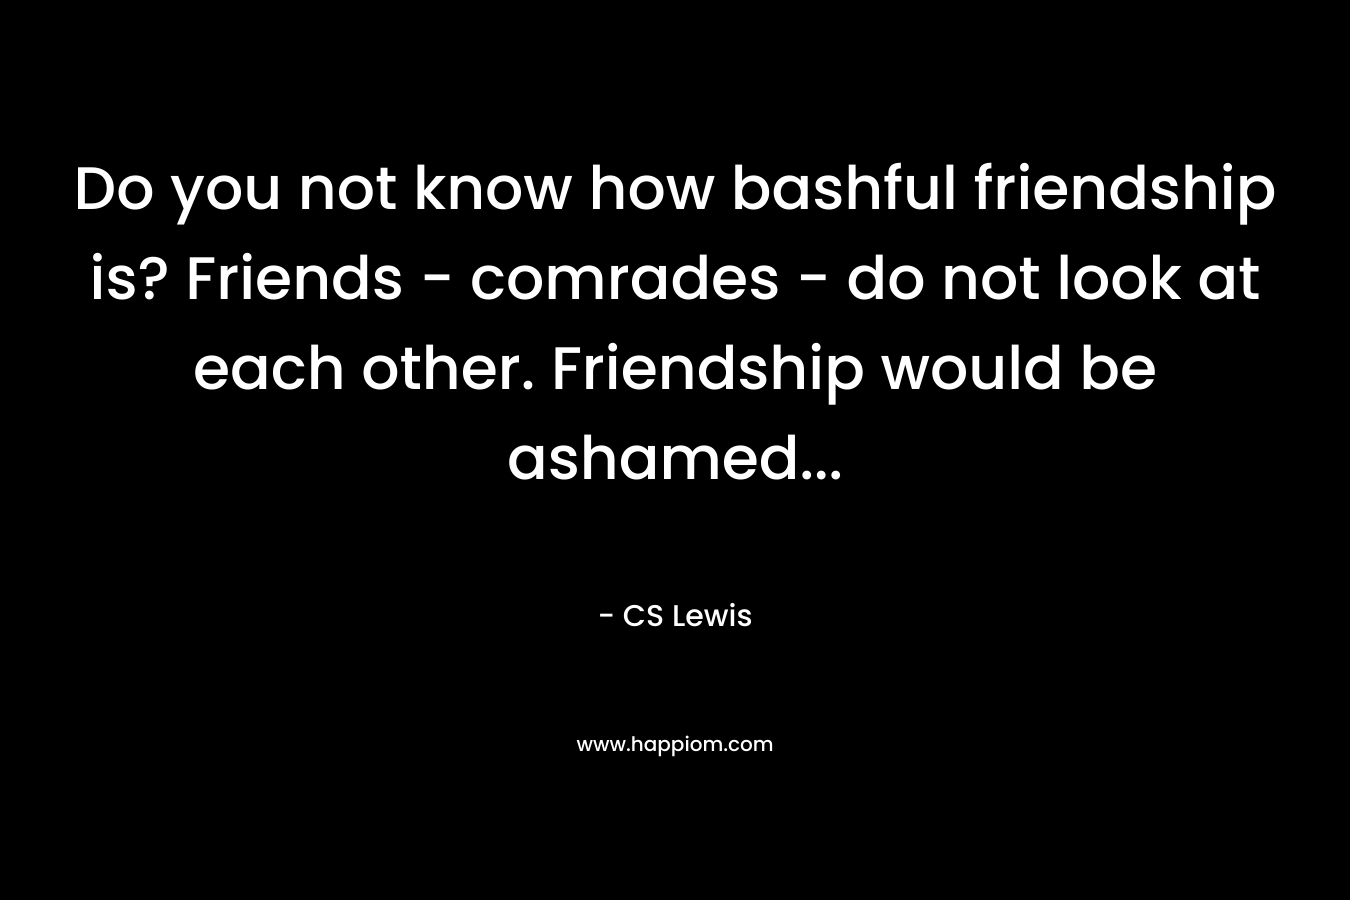 Do you not know how bashful friendship is? Friends - comrades - do not look at each other. Friendship would be ashamed...